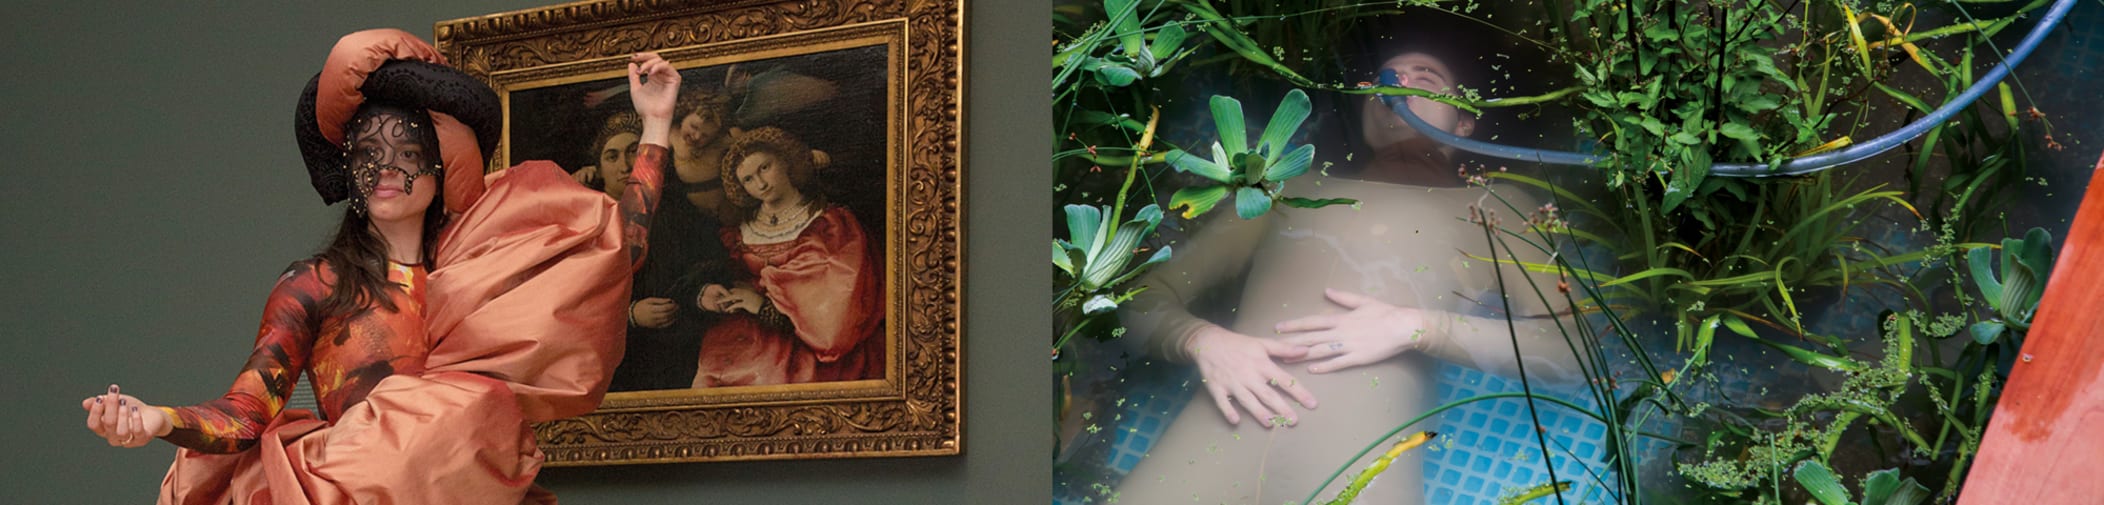 Model in costume posing in front of museum portrait (left) display featuring a person submerged under water (right)